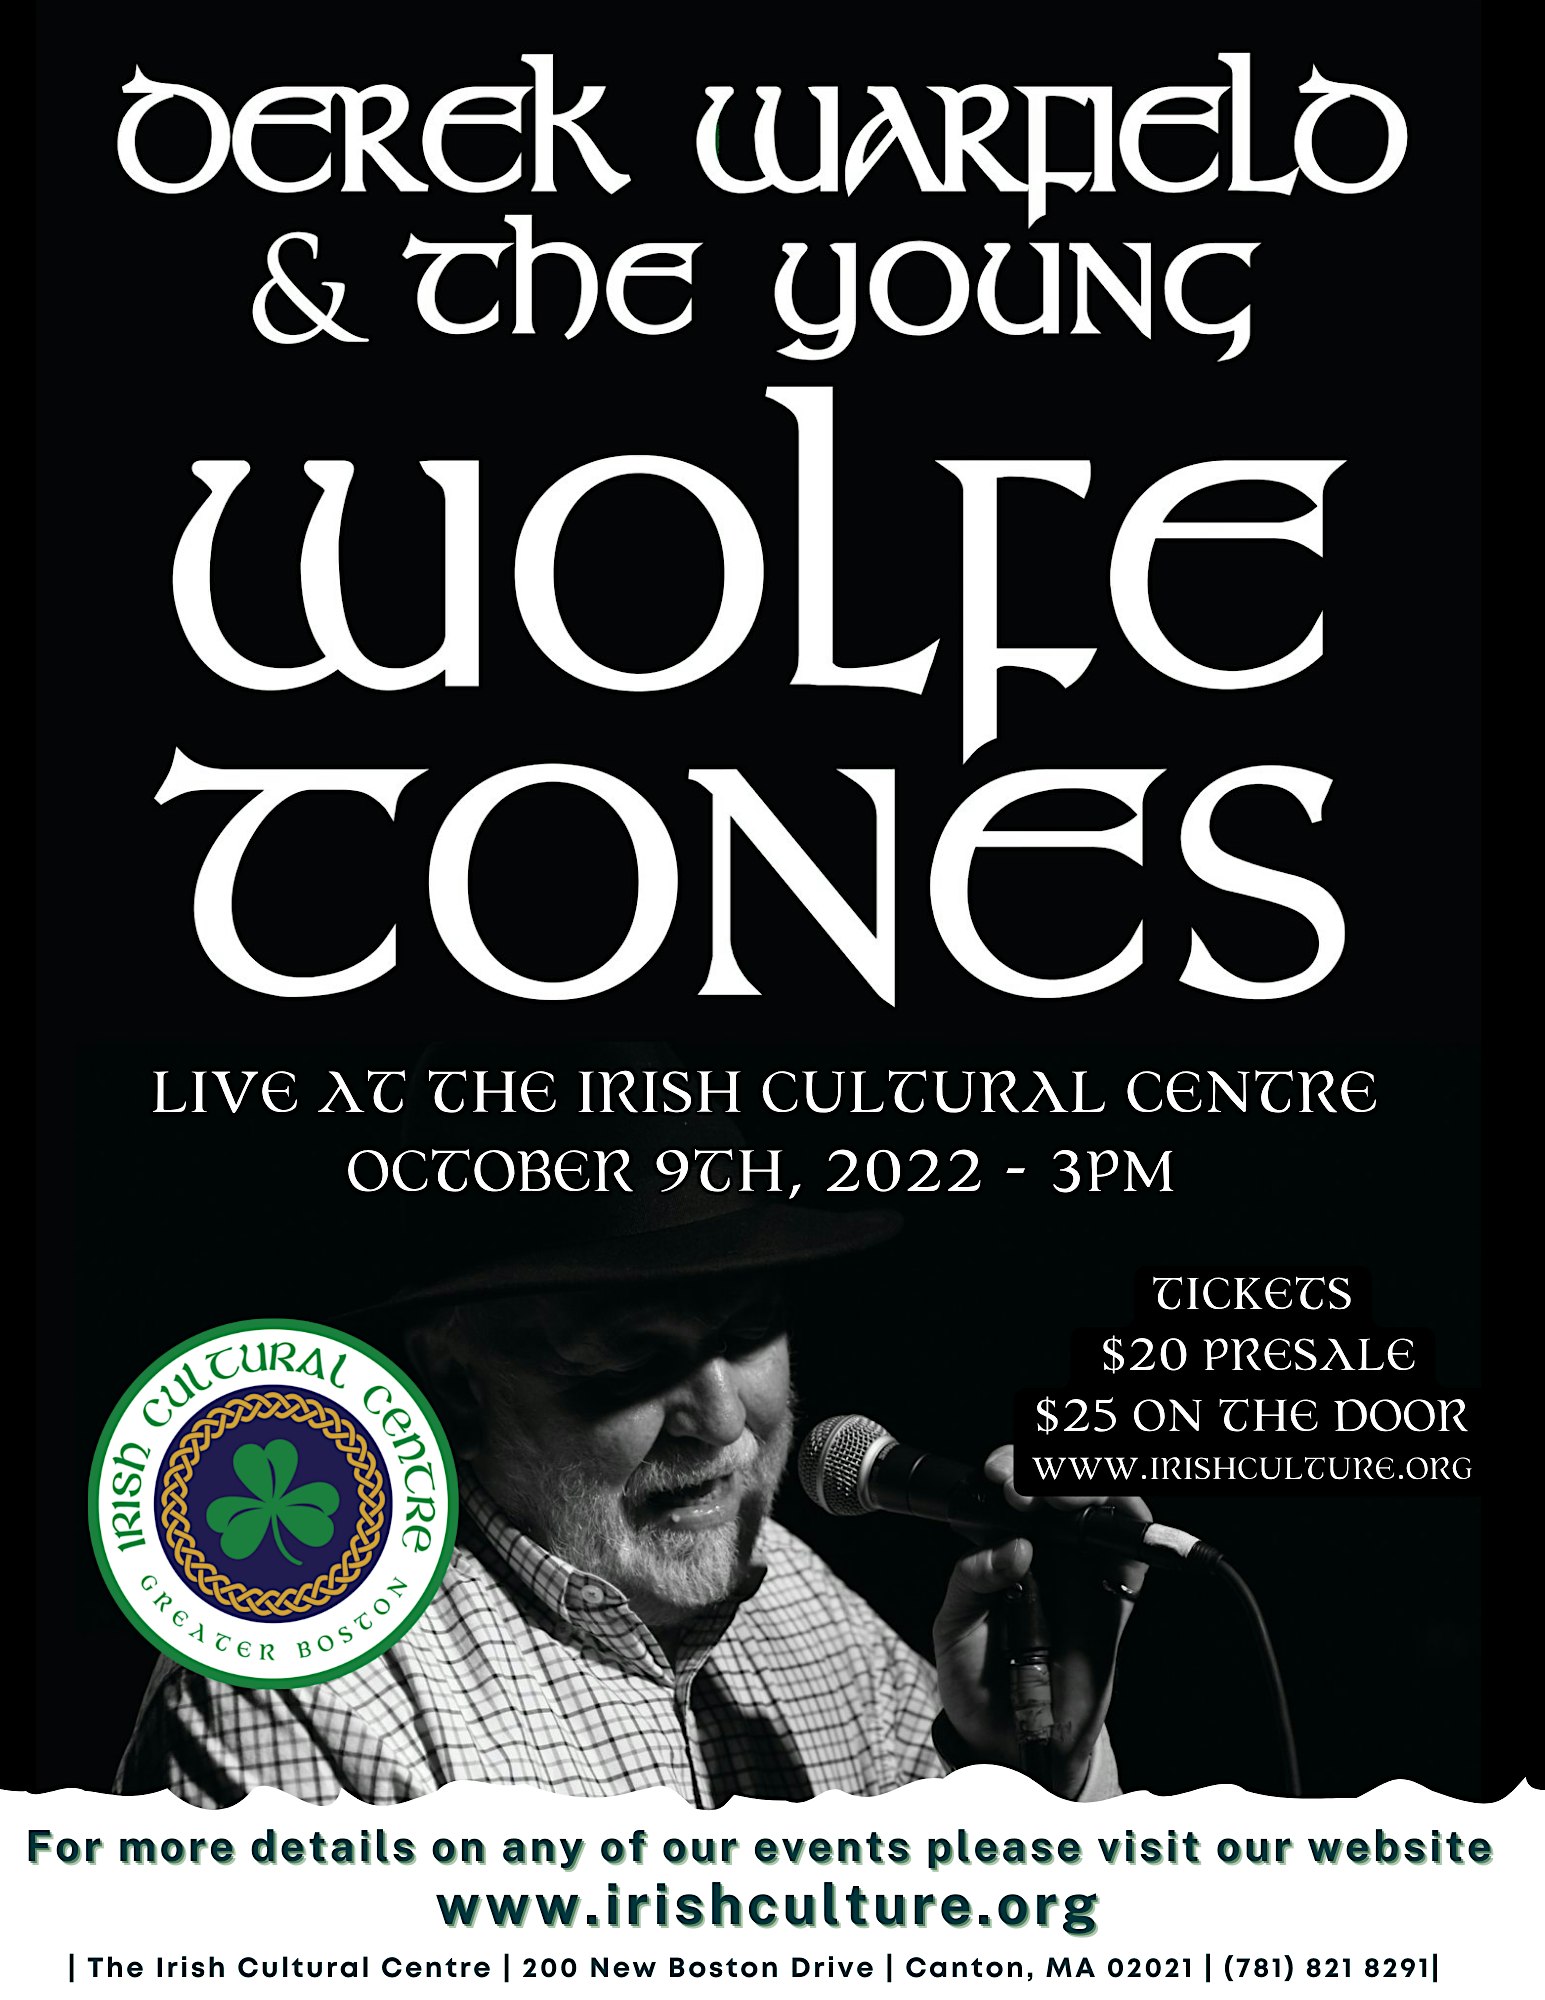 Derek Warfield & The Young Wolfe Tones Live at the Irish Cultural Centre